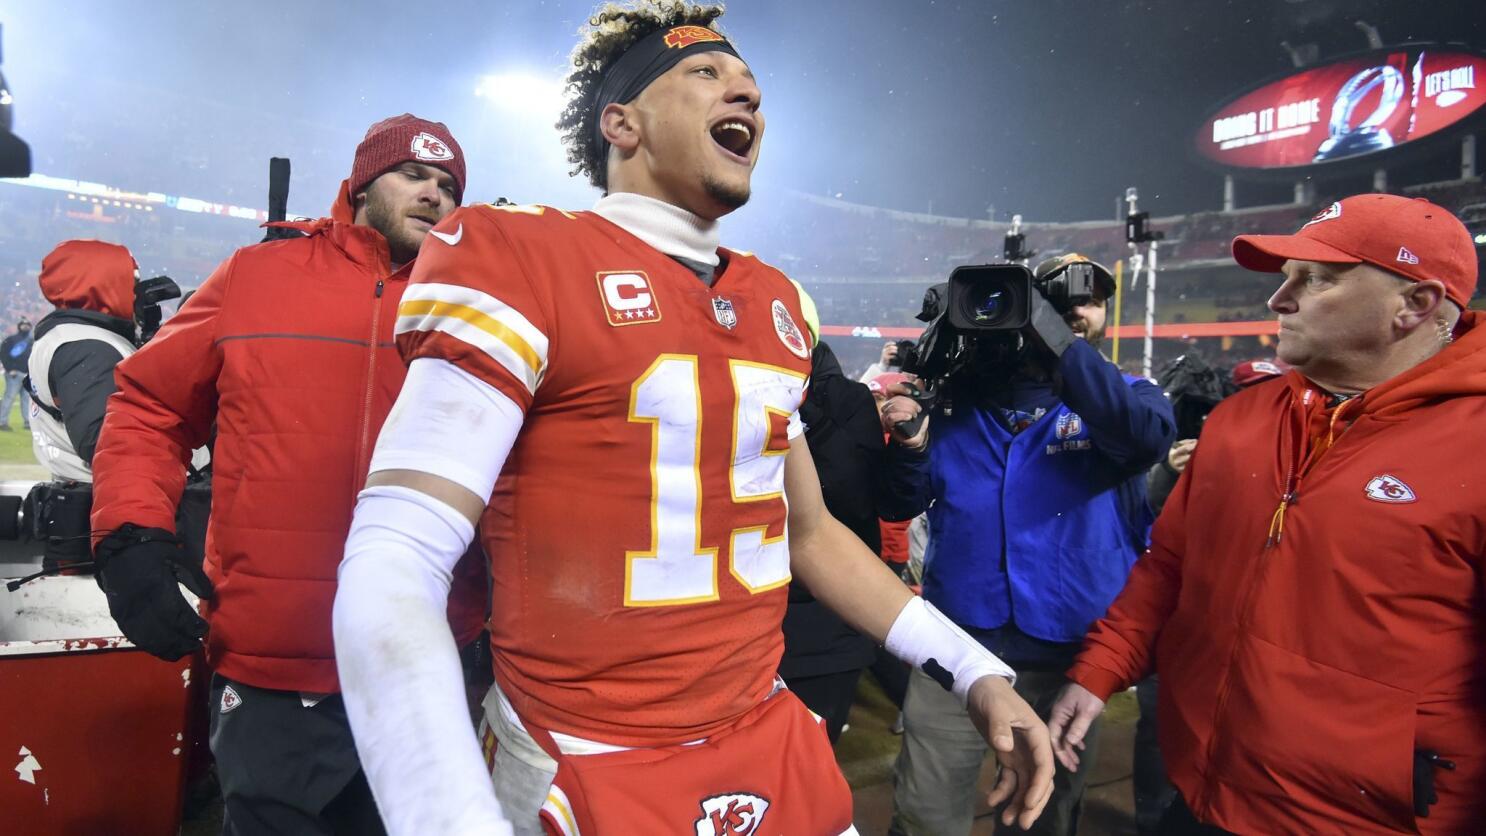 Patrick Mahomes: The promising baseball pitcher who became the